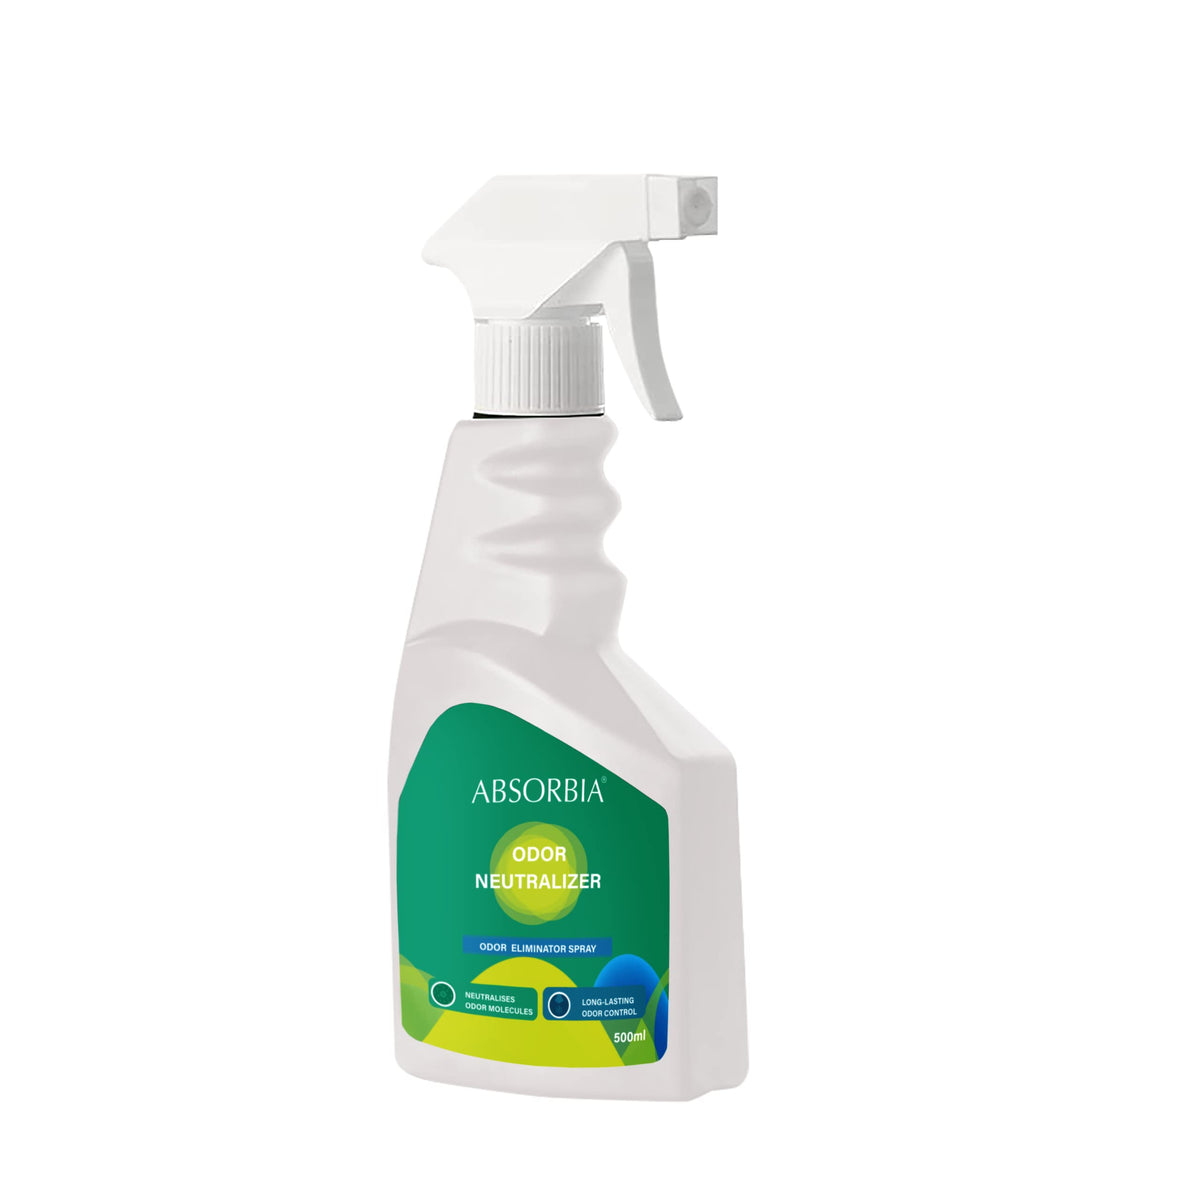 Absorbia Odour Neutralizer & Air Freshener Fabric + spaces Refresher, Eliminate Odours & Disinfect and Deodorize Fabric, bathrooms, cars and living spaces (500 ML)